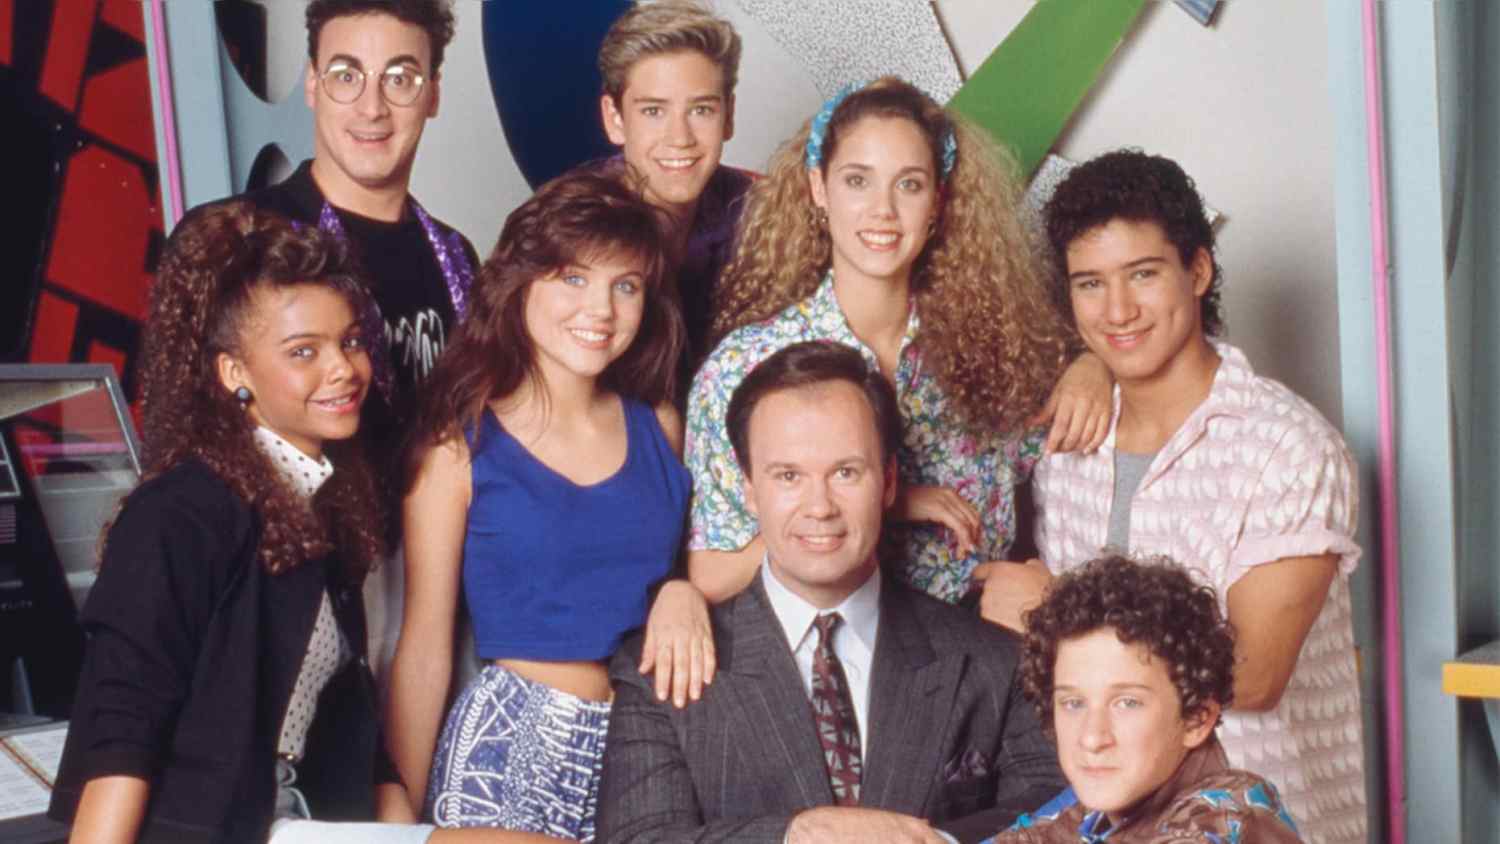 'saved by the bell' star dustin diamond dead at 44 after battle with stage 4 cancer